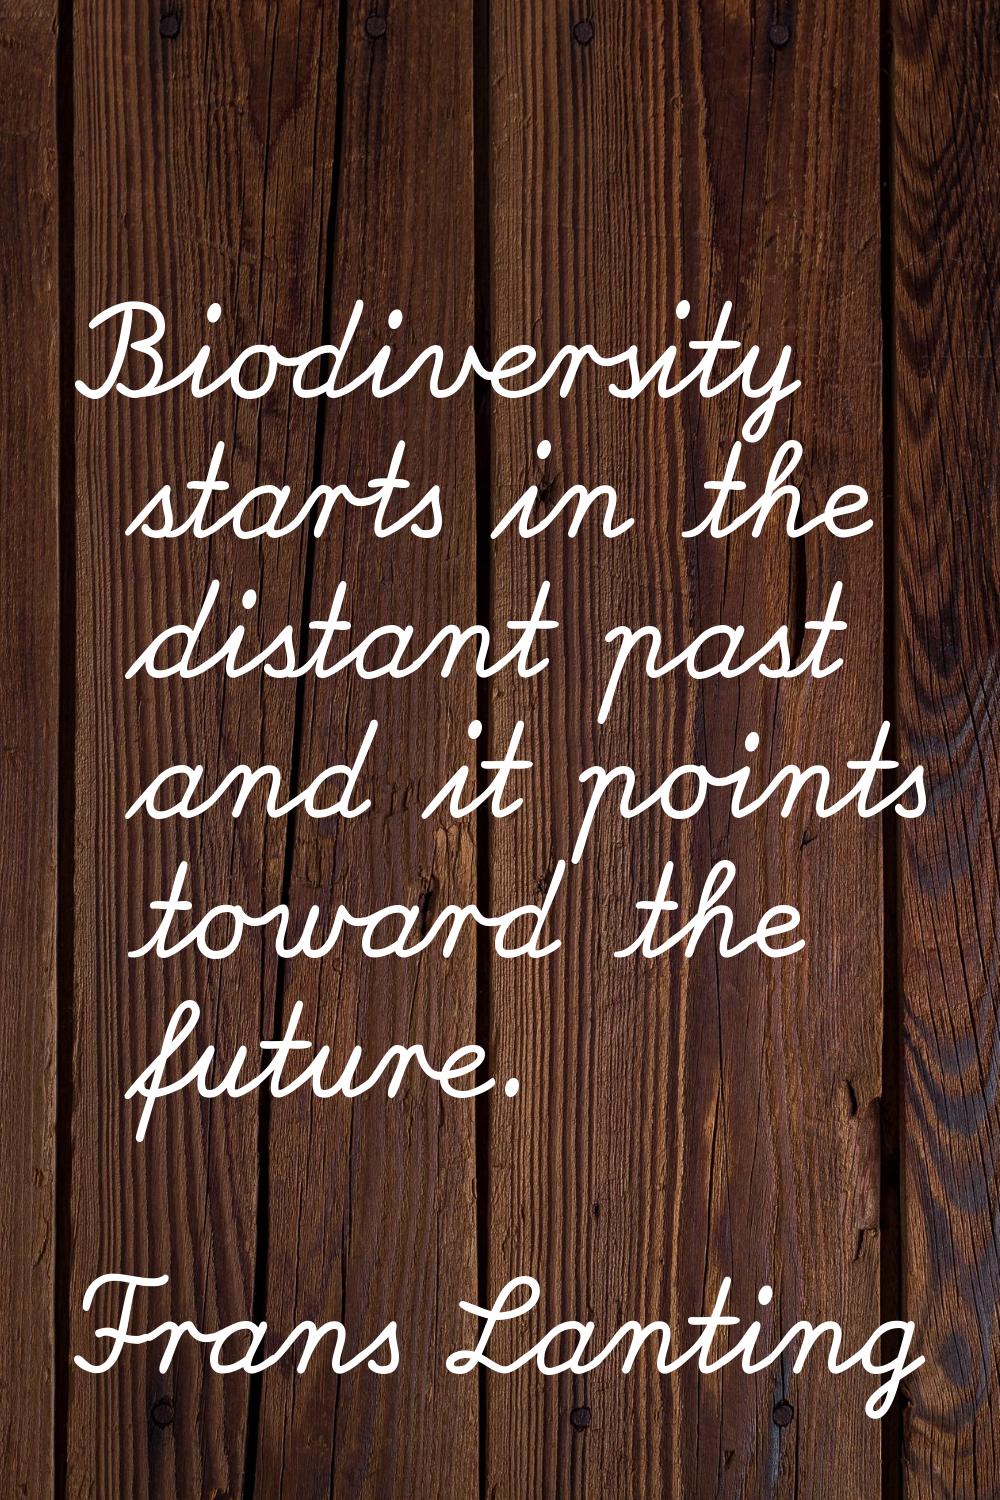 Biodiversity starts in the distant past and it points toward the future.